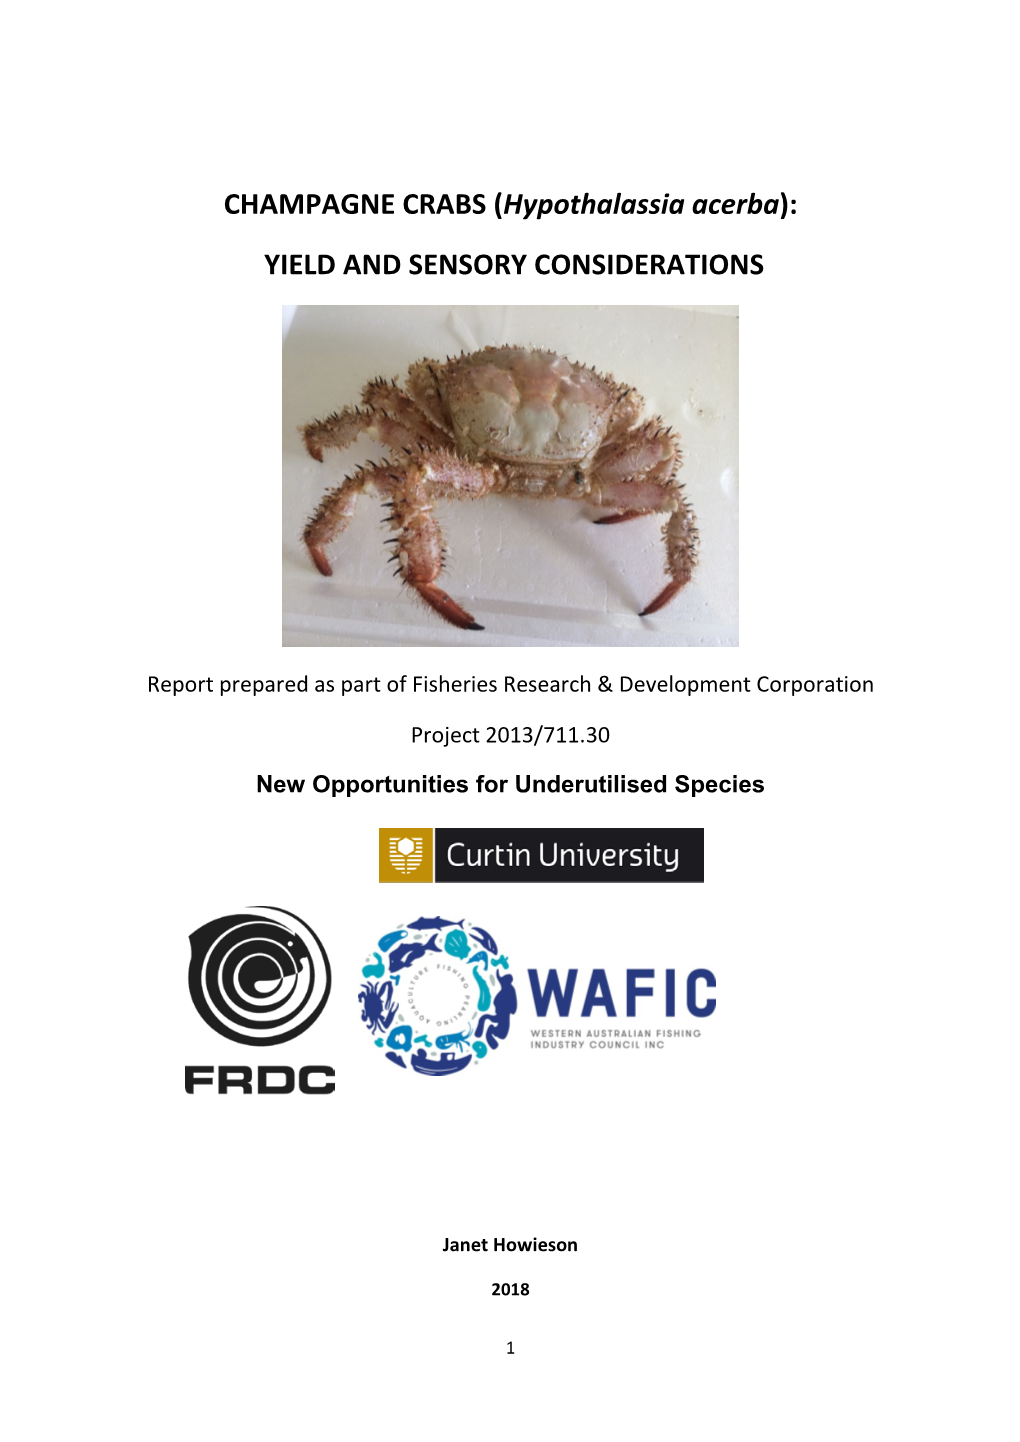 CHAMPAGNE CRABS (Hypothalassia Acerba): YIELD and SENSORY CONSIDERATIONS